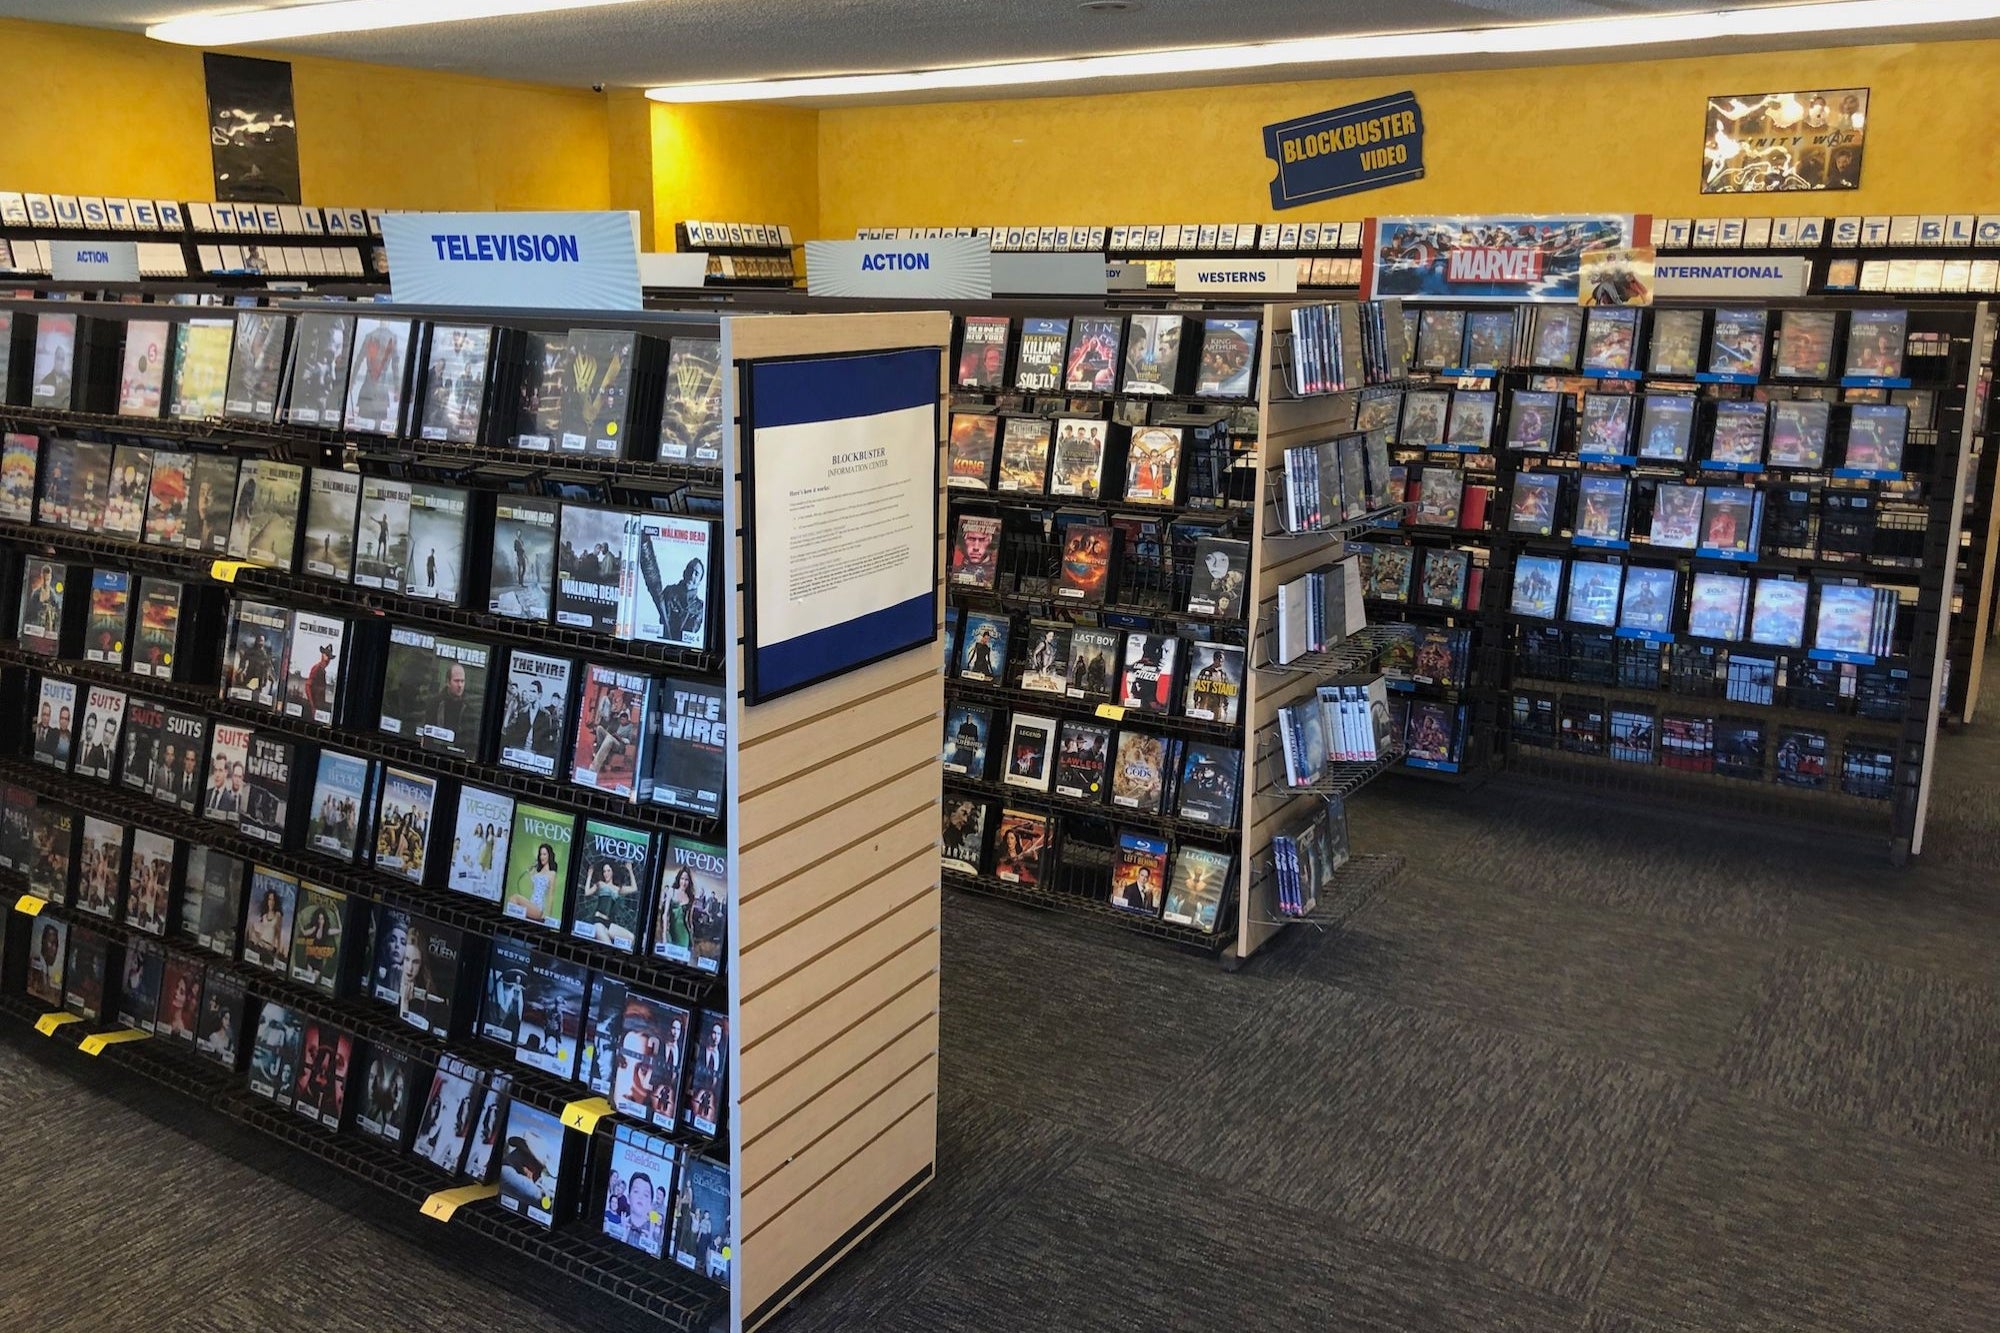 Is Blockbuster Making a Comeback?